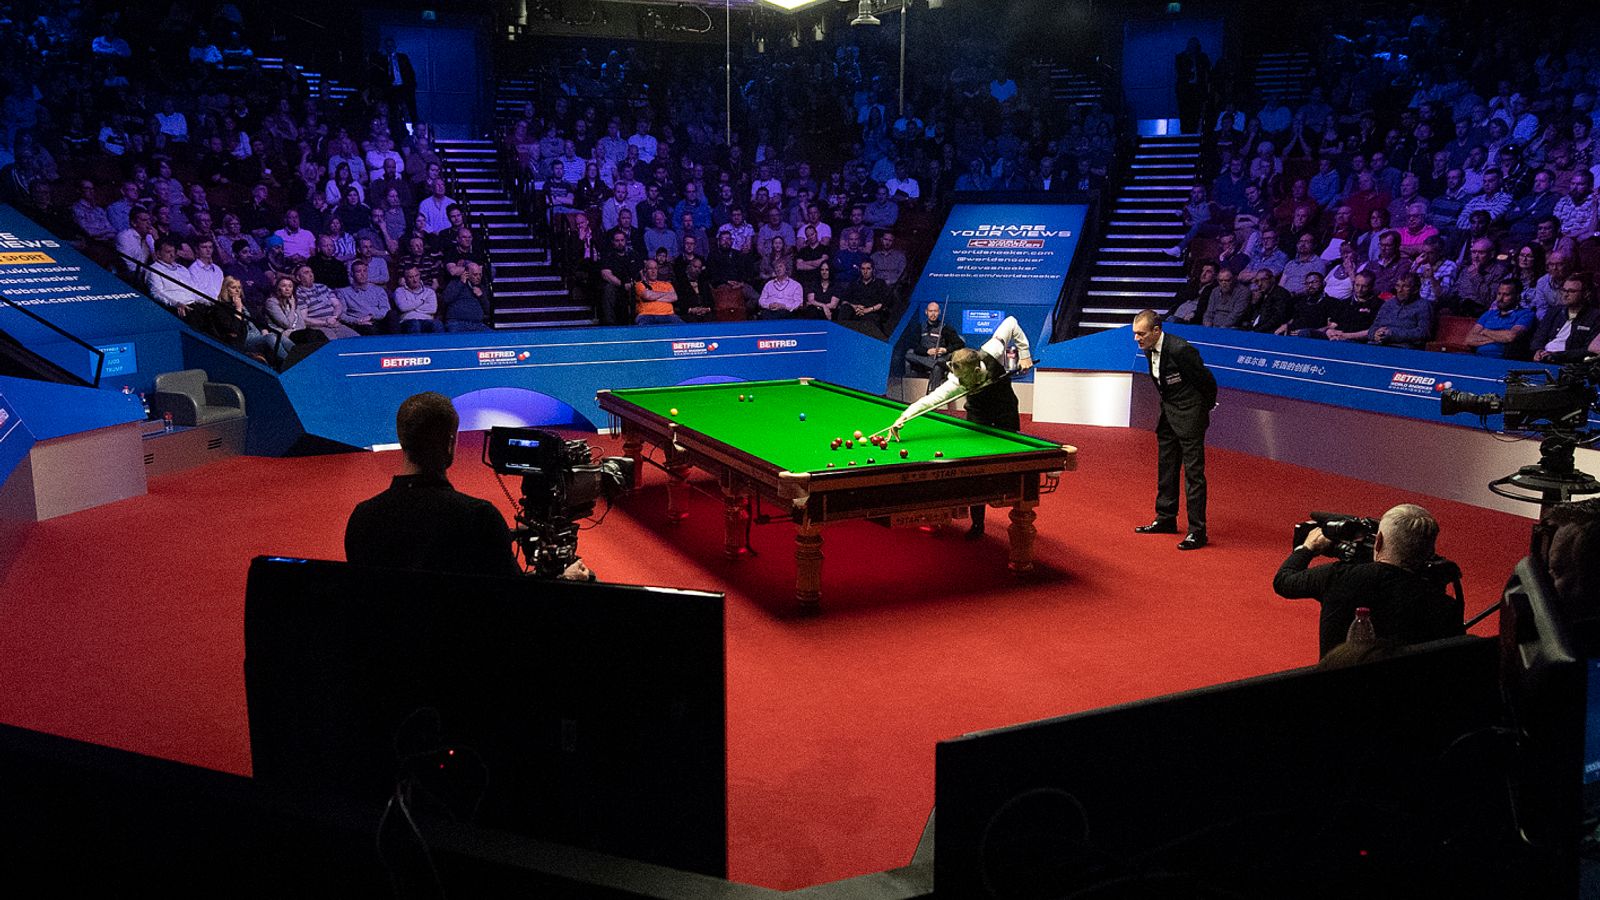 Snooker Full capacity at Crucible Theatre for 2021 World Snooker Championship final in May Snooker News Sky Sports